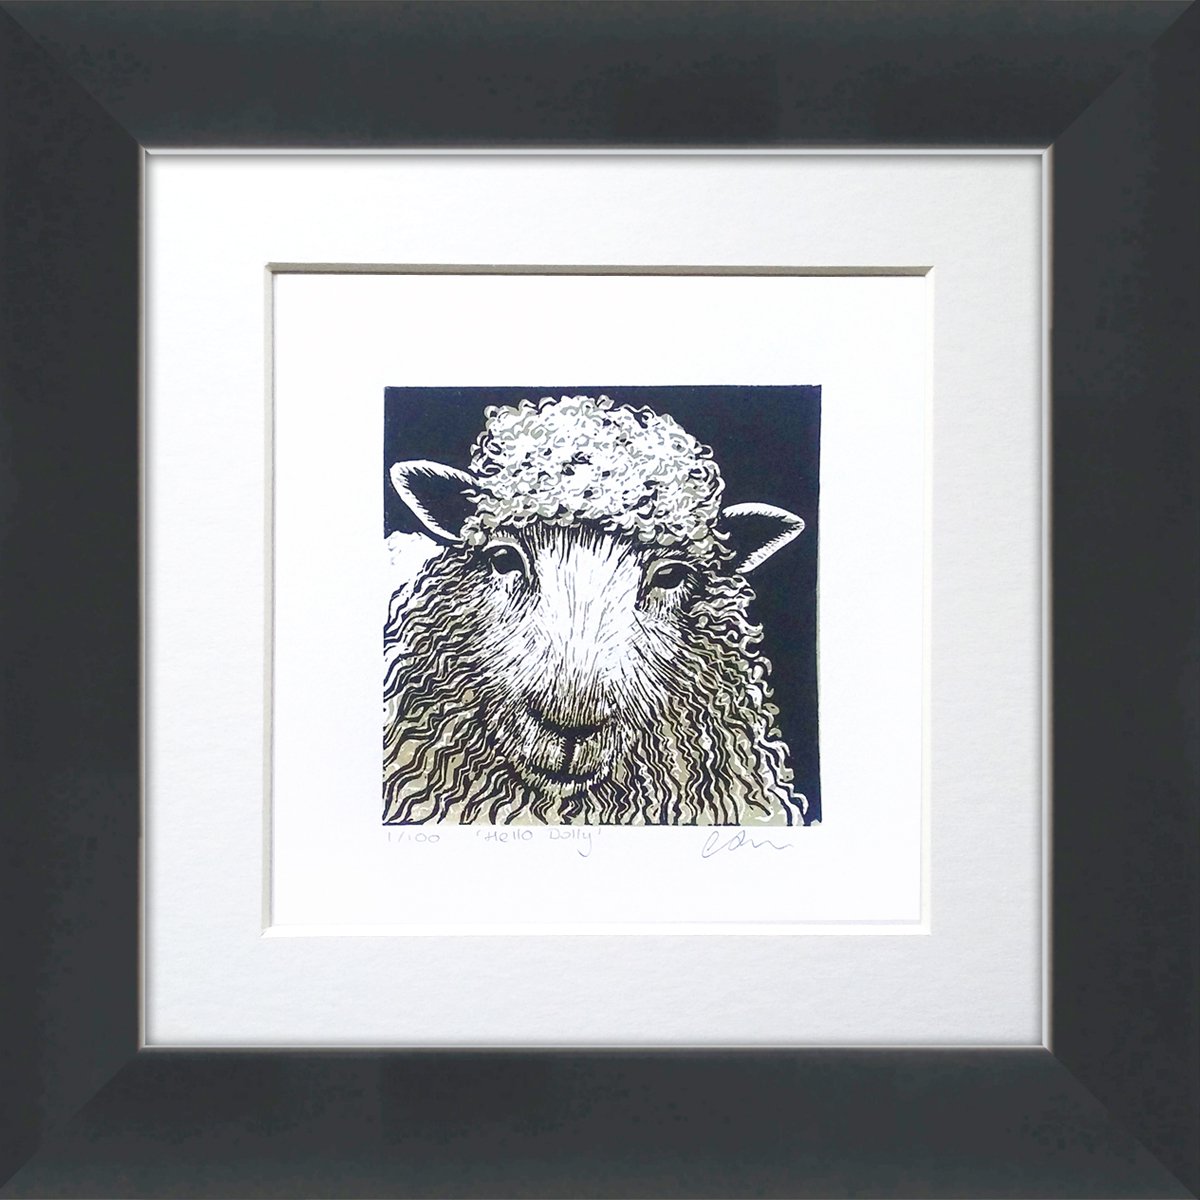 Hello Dolly (sheep linocut print) framed and ready to hang by Carolynne Coulson